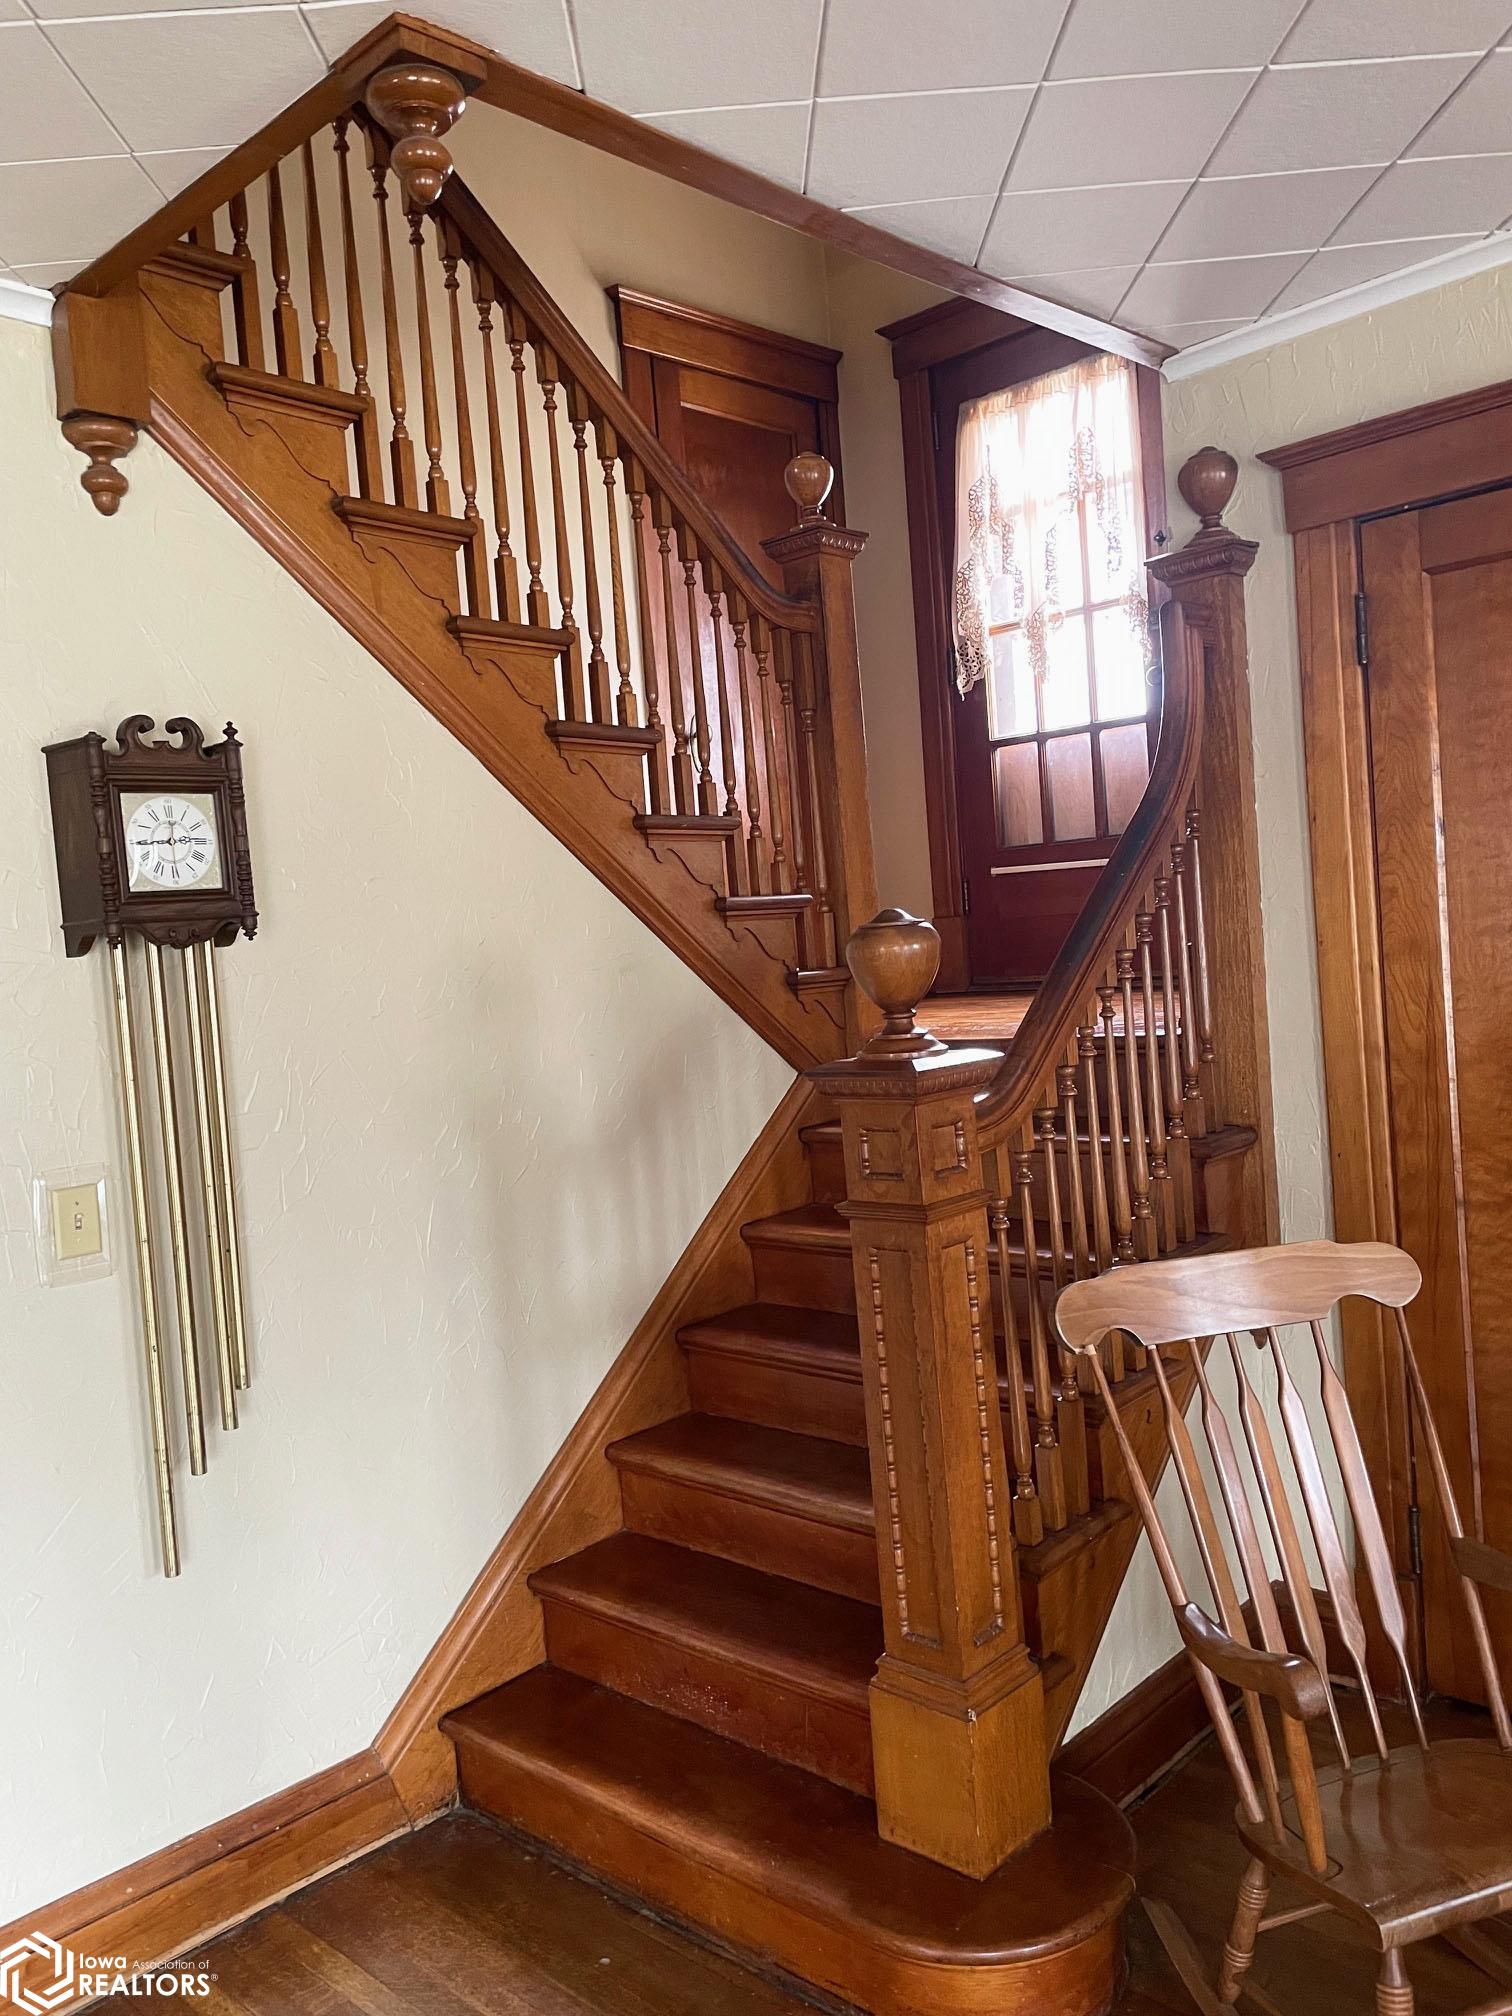 Another view of the stately staircase that leads upstairs to 4 bedrooms and a full bath.